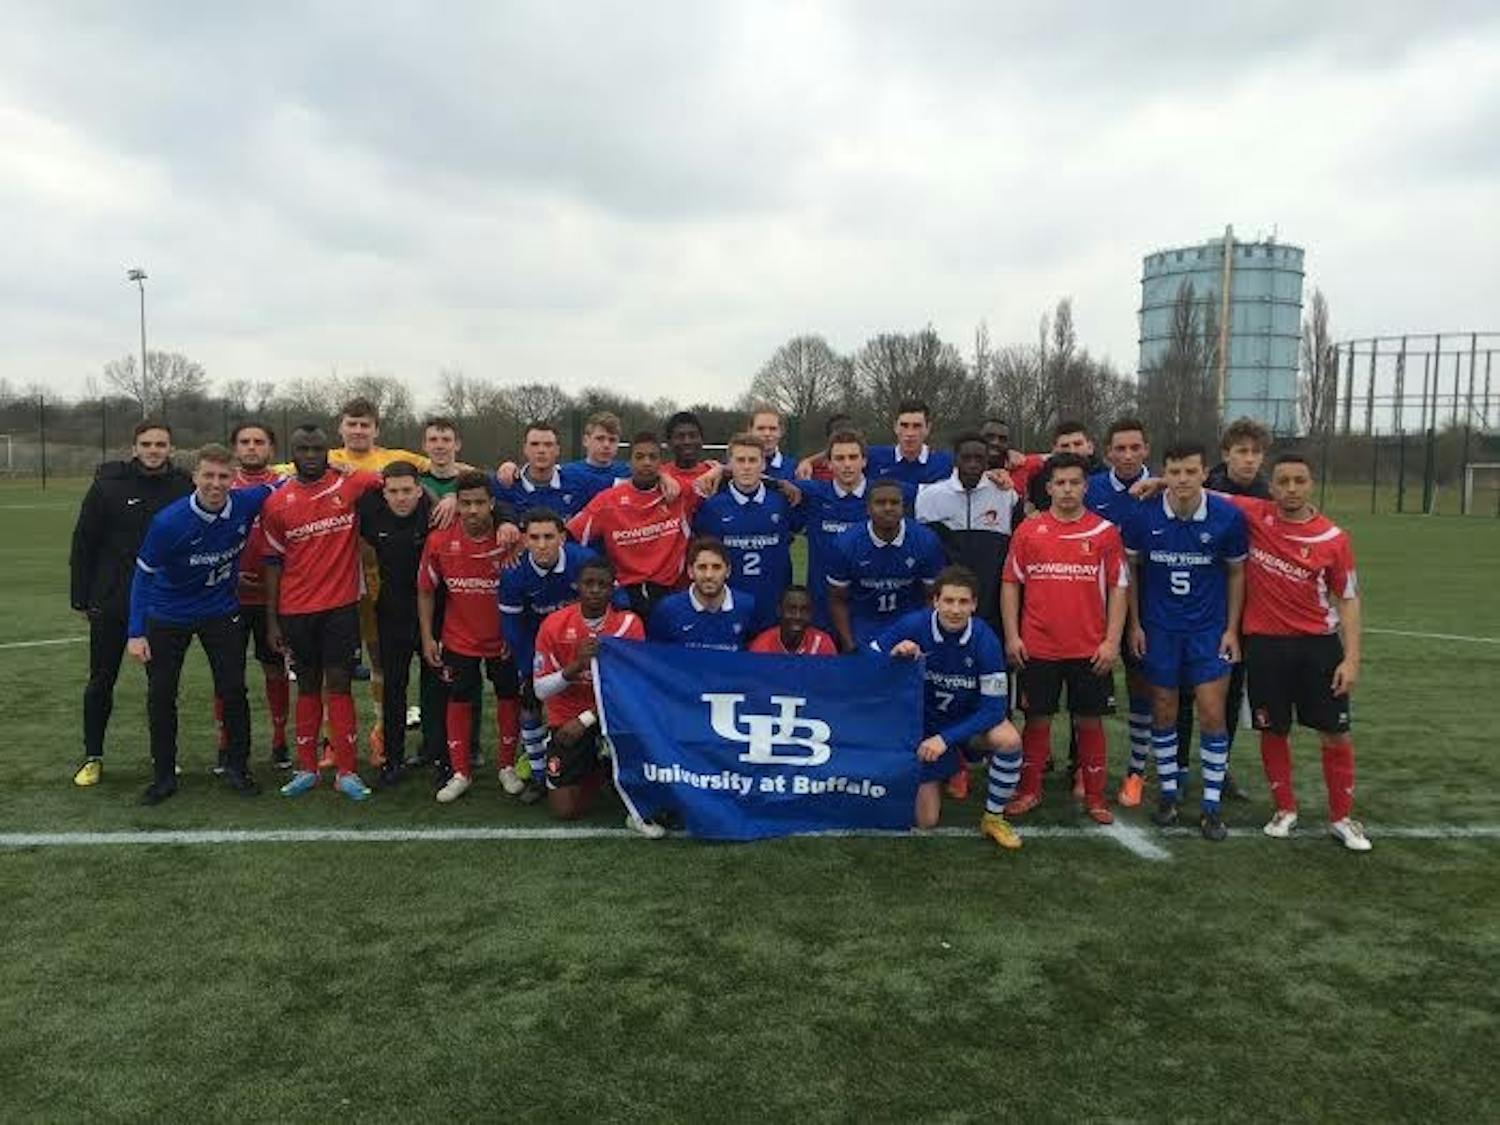 The men’s soccer team poses with Hayes and Yeading FC. The Bulls traveled to the United Kingdom over spring break and went 4-0 in competition that ranged from U19 teams to professional squads.